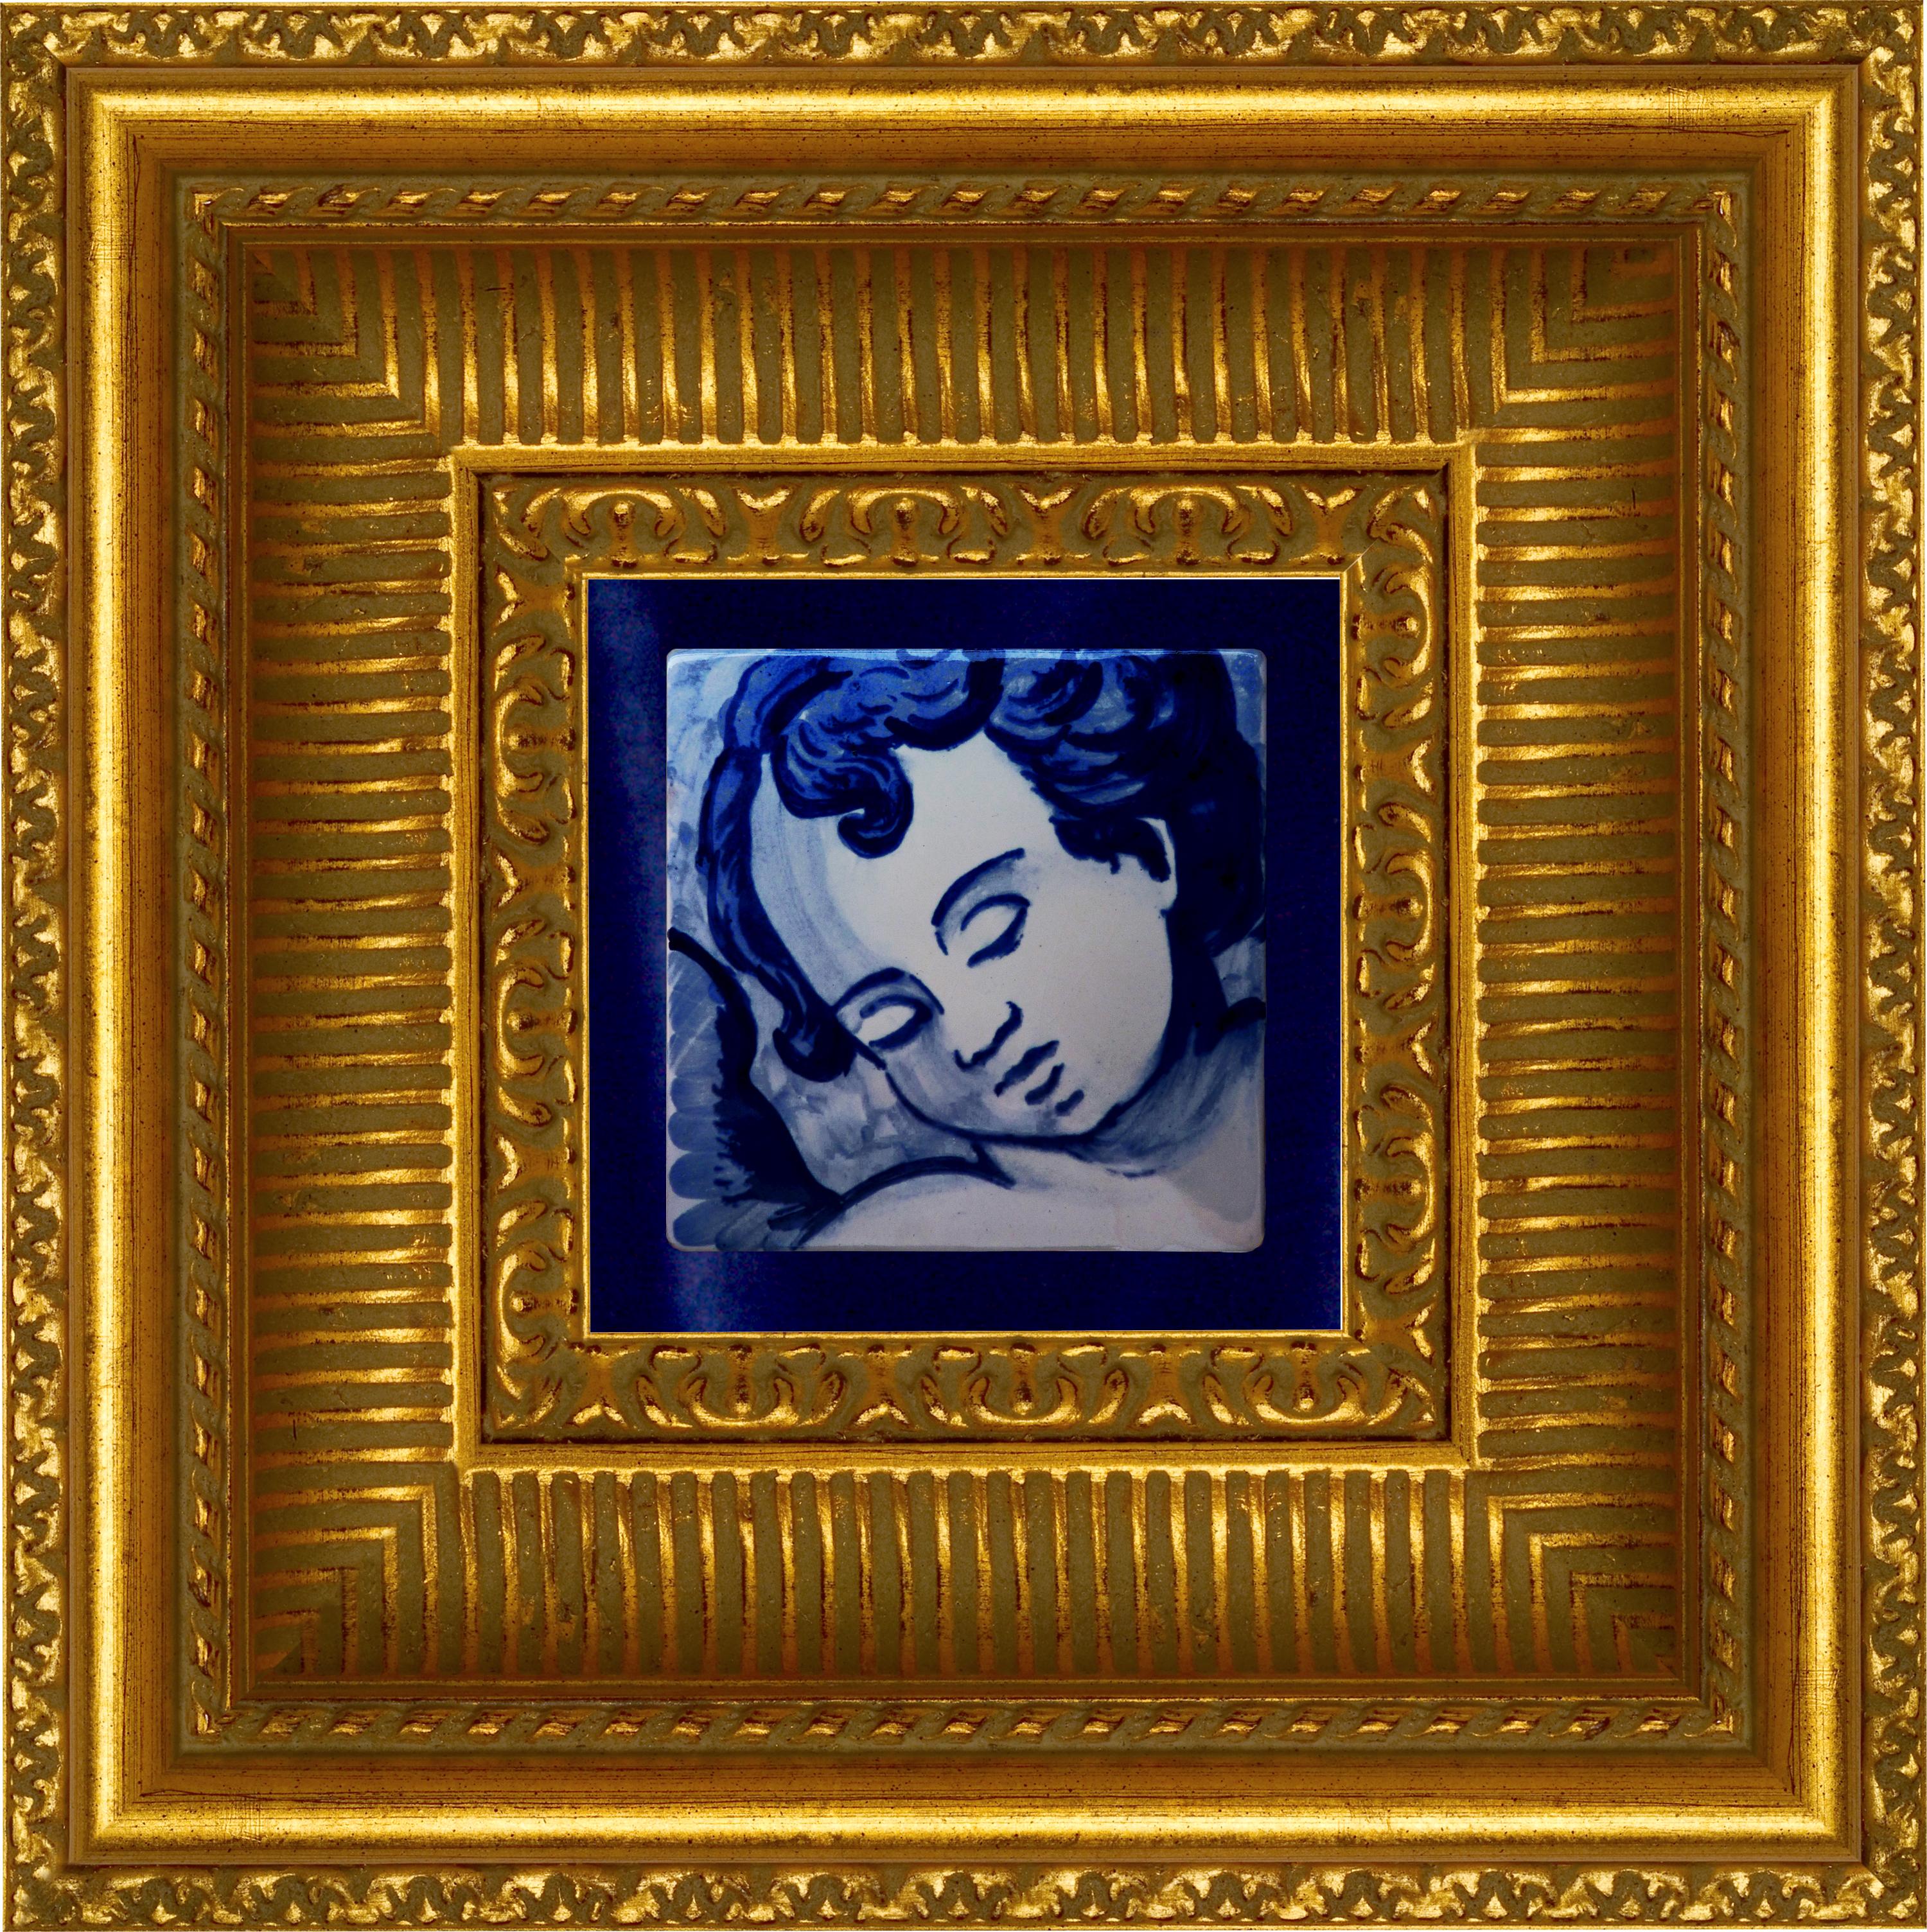 Gorgeous blue hand-painted baroque cherub or angel 18th century style Portuguese ceramic Tile/Azulejo
The tile painted in cobalt blue over white in typical 18th century Portugal set the taste for monumental ceramic tile applications in churches and